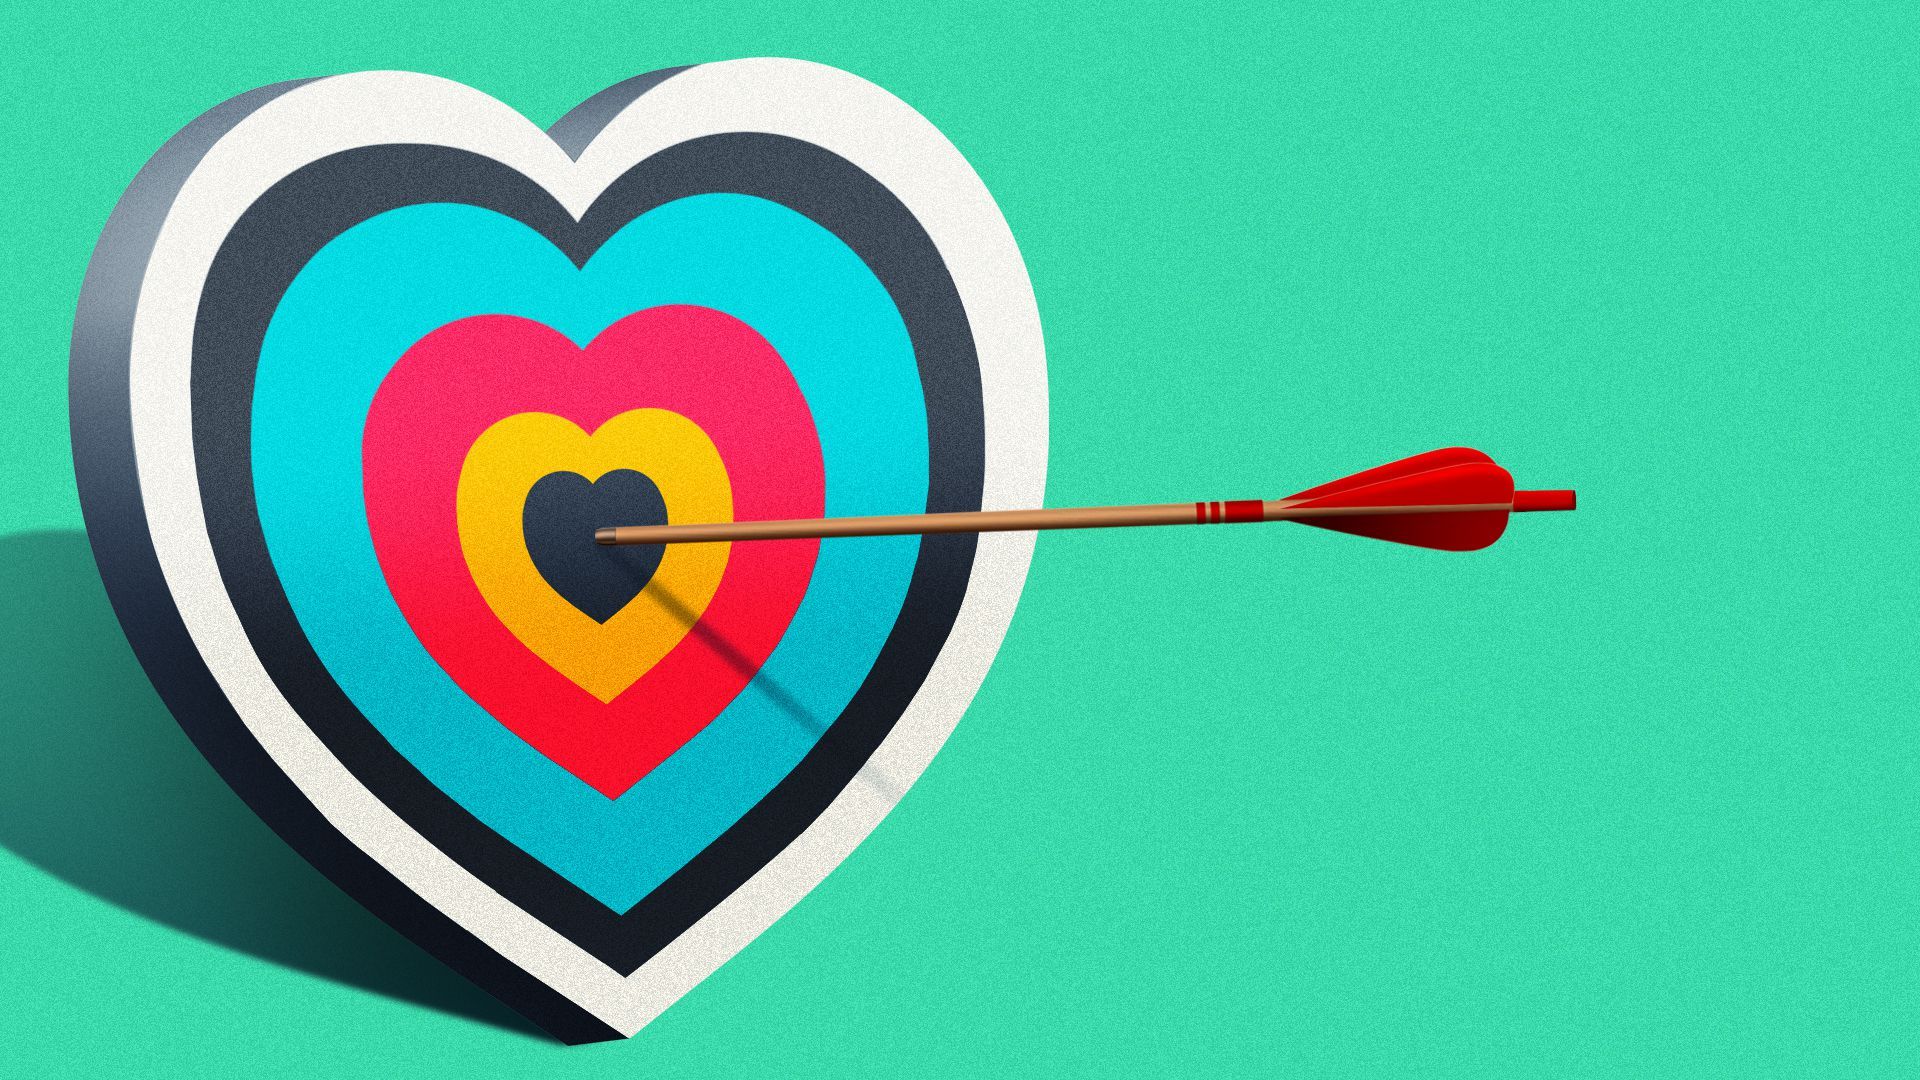 Illustration of an arrow in the middle of a heart-shaped target